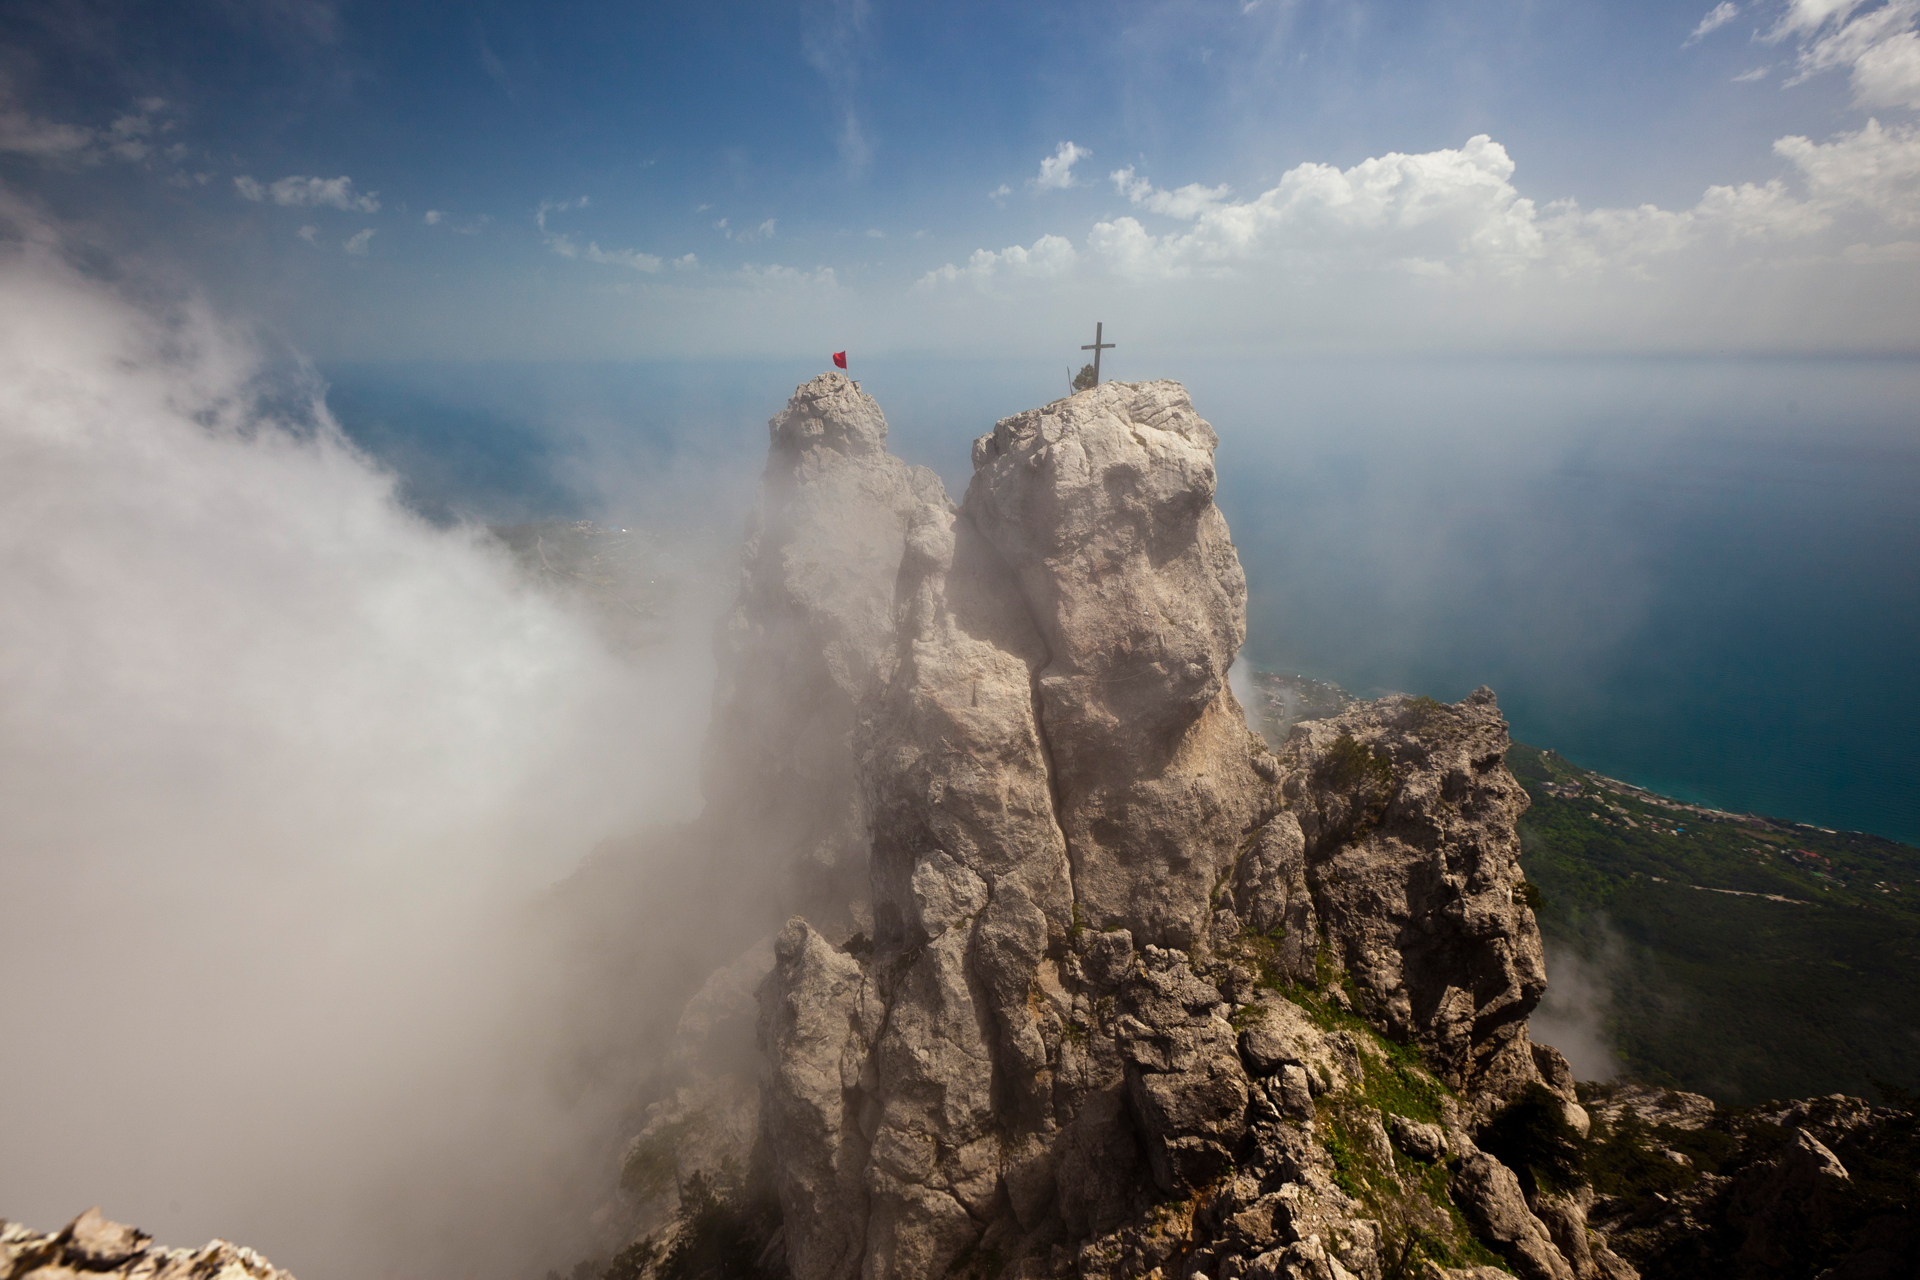  At 1,234m, Ai-Petri is not the highest mountain in Crimea. But it's certainly one of the most spectacular, with its sparkling white limestone peak and its jagged `teeth’.  Miskhor, Crimea  